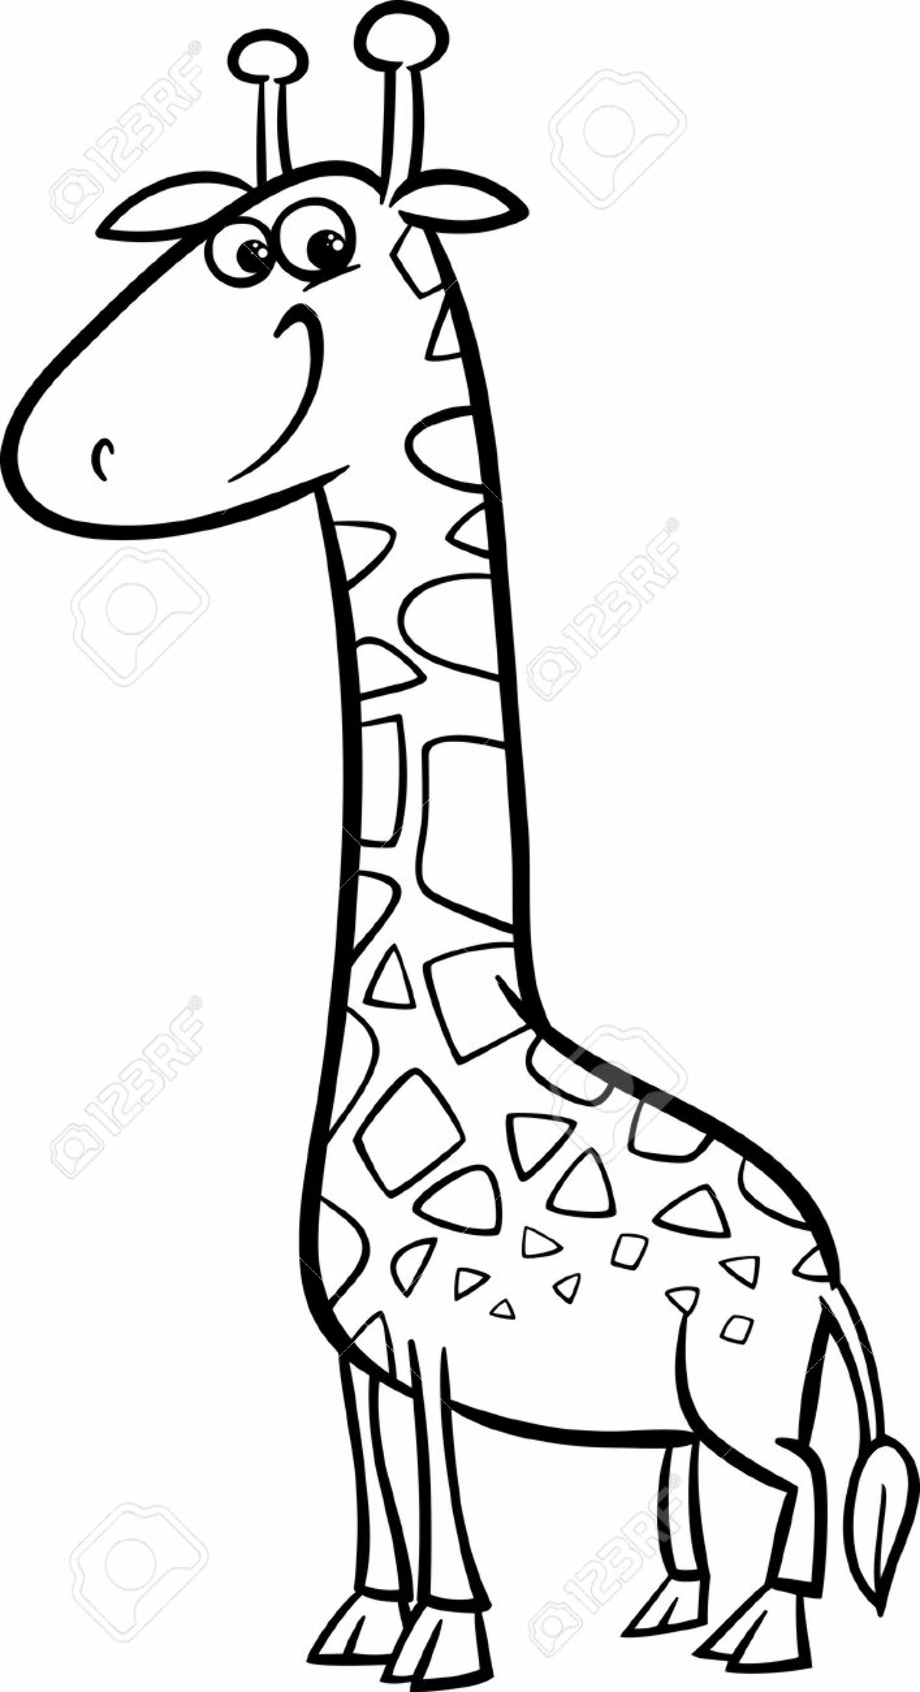 Download High Quality giraffe clipart black and white Transparent PNG